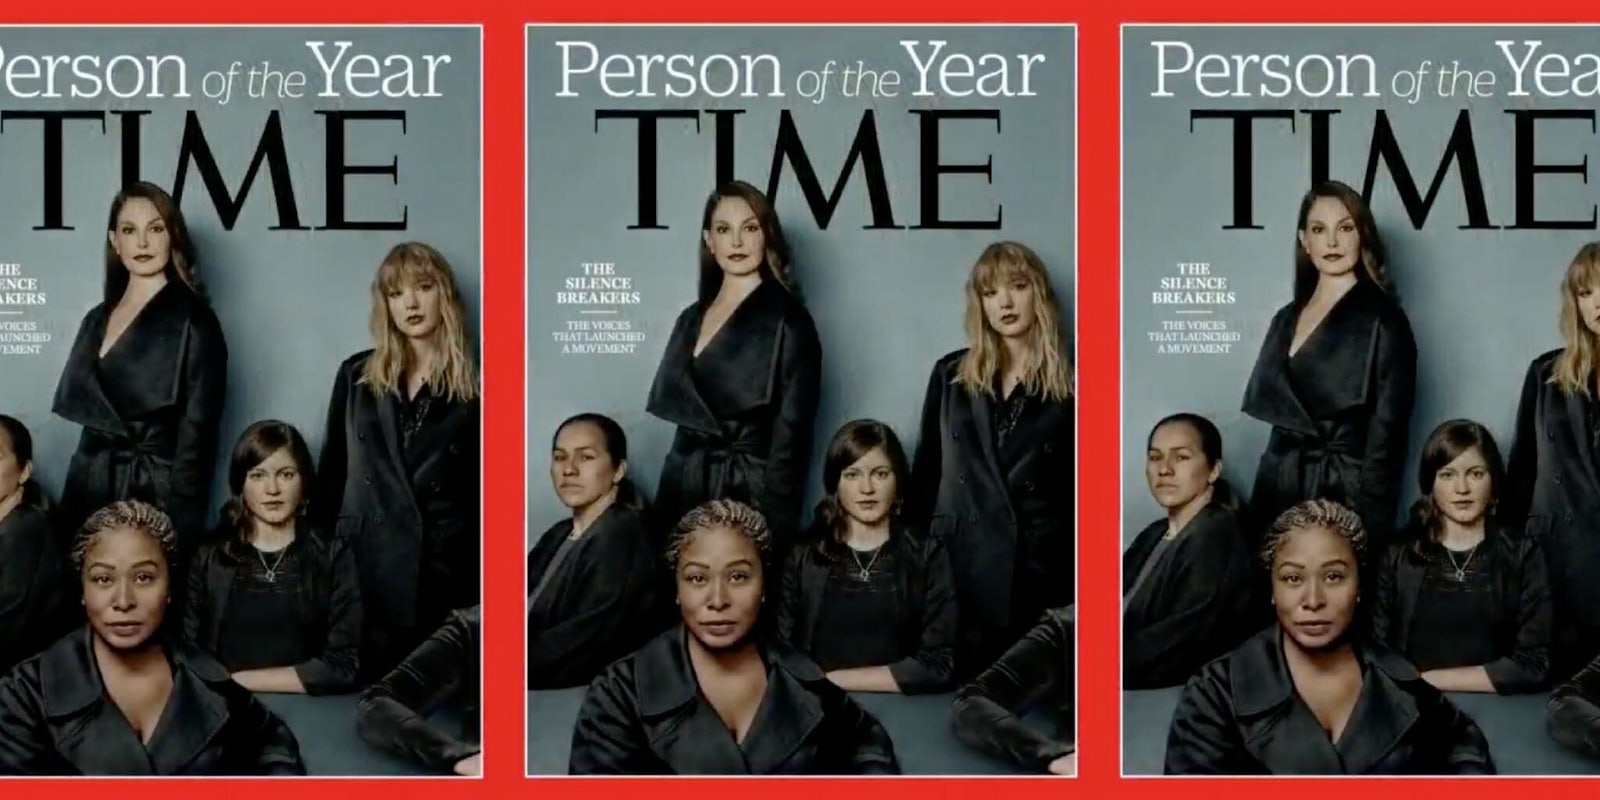 'Time' person of the year are the silence breakers who said 'me, too'